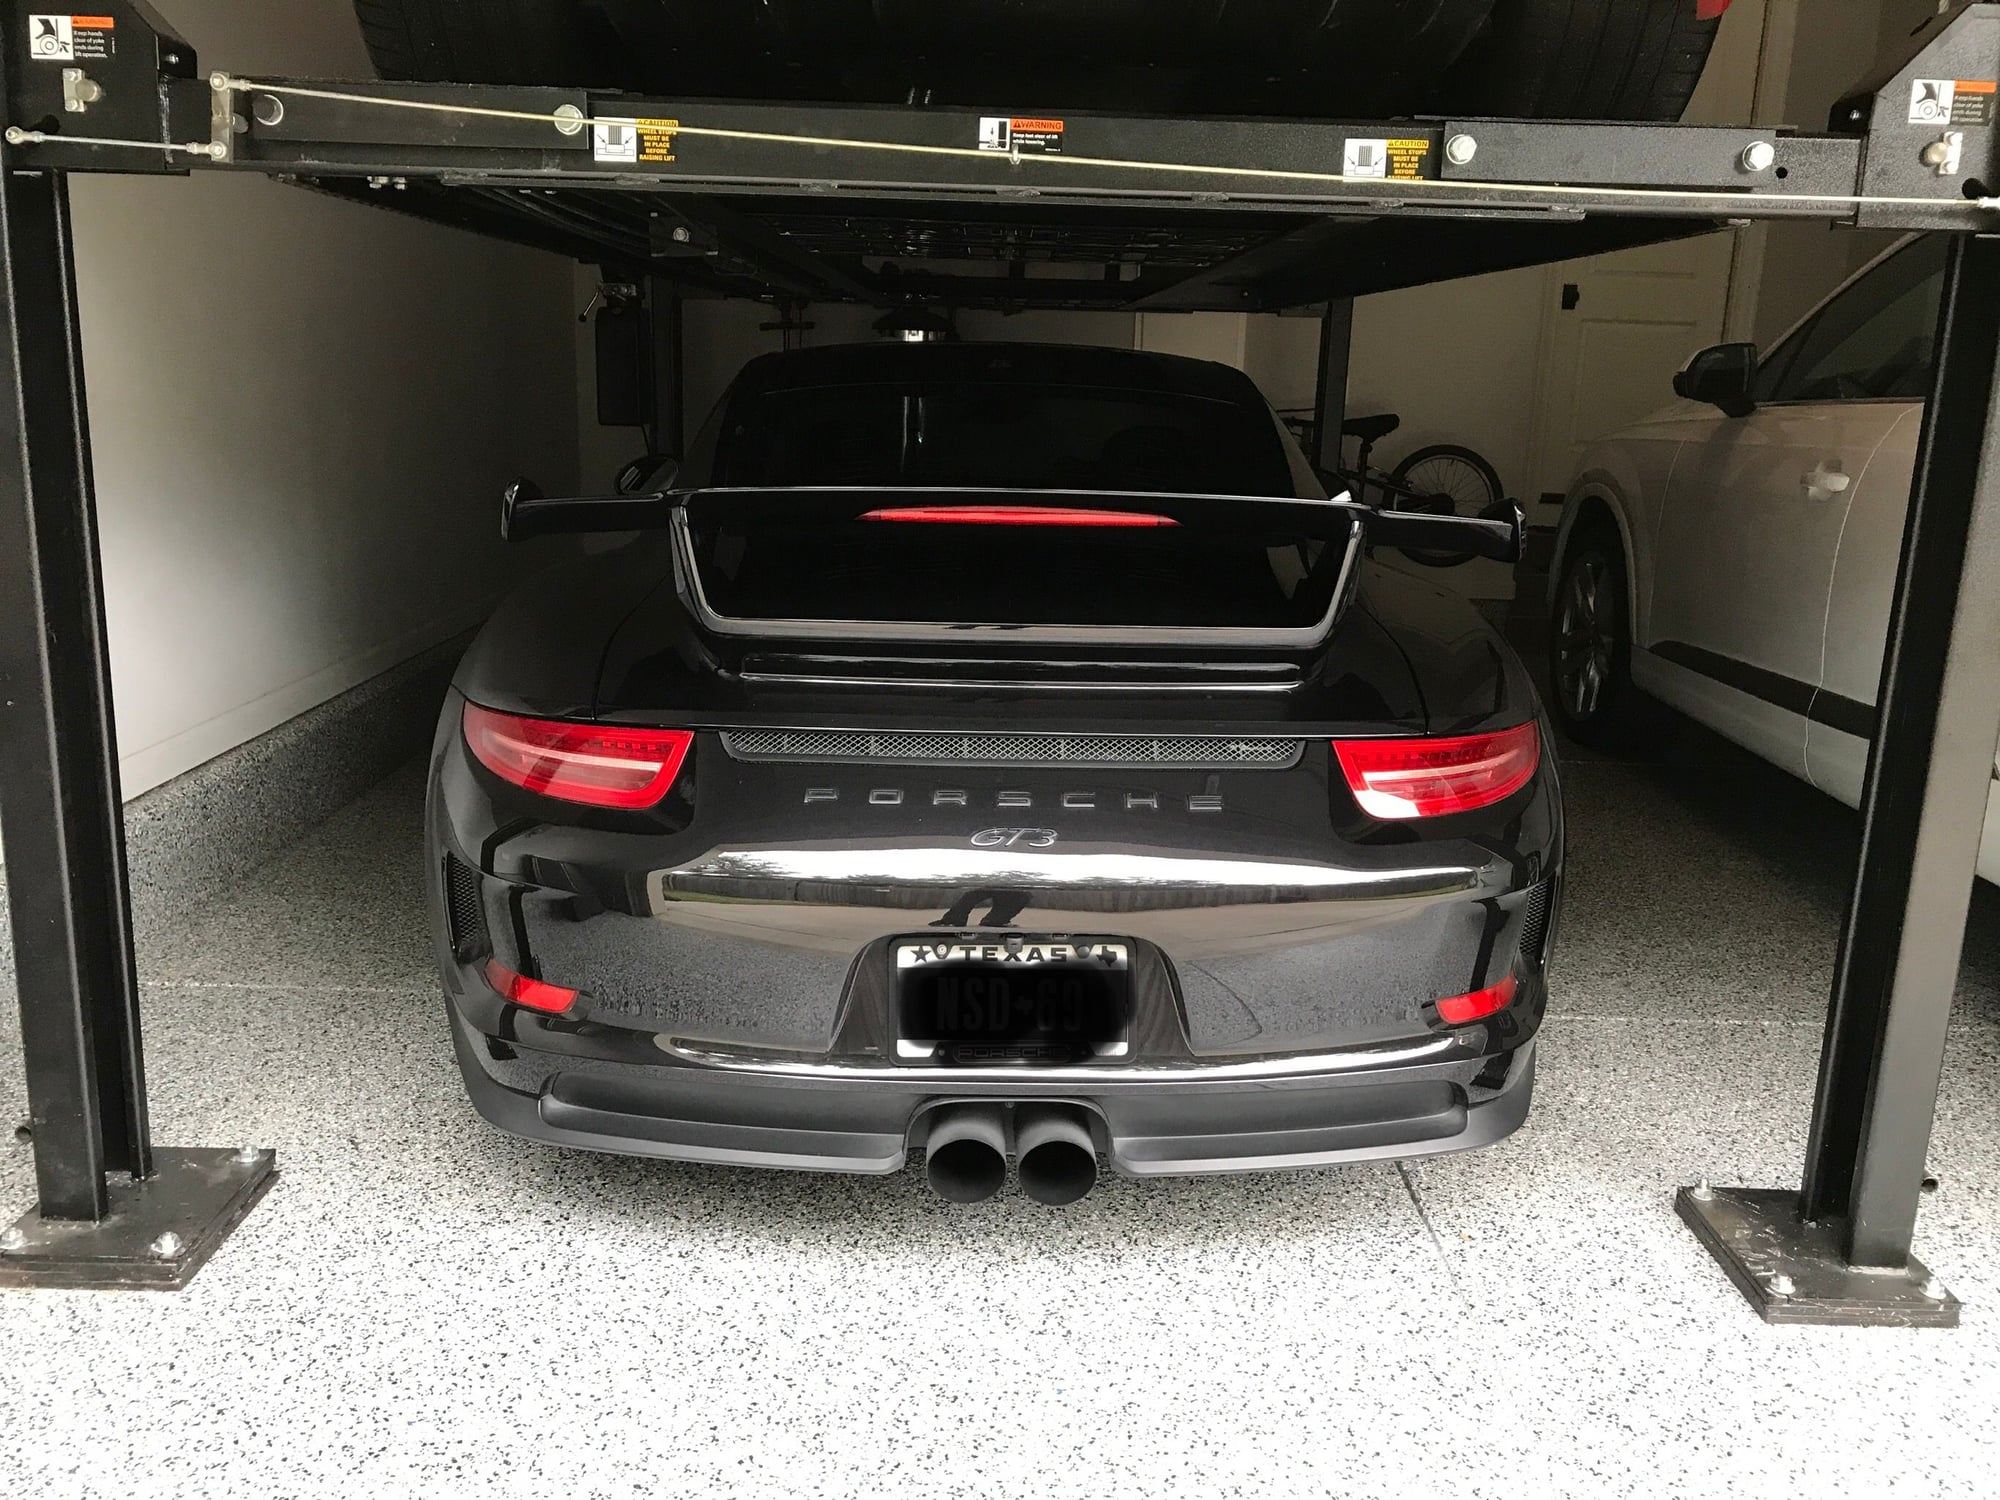 2014 Porsche GT3 - High MSRP $171k 991.1 gt3, never tracked, never launched, with extras. black/black - Used - VIN WP0AC2A92ES183174 - 17,400 Miles - 6 cyl - 2WD - Automatic - Coupe - Black - Dallas, TX 75225, United States